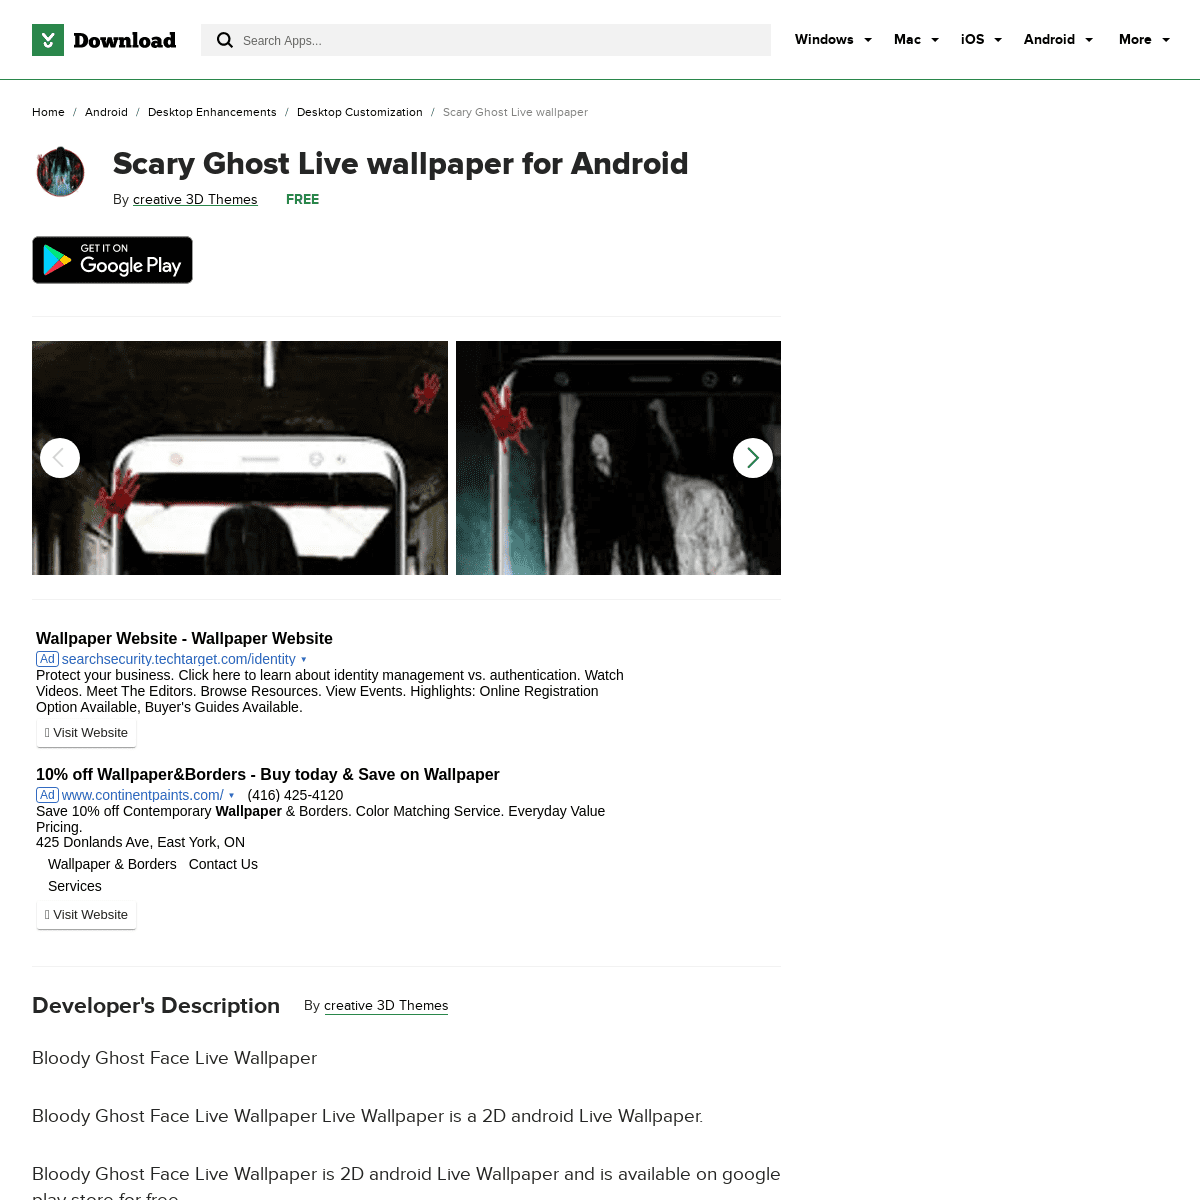 A complete backup of https://download.cnet.com/Scary-Ghost-Live-wallpaper/3000-2072_4-78170529.html